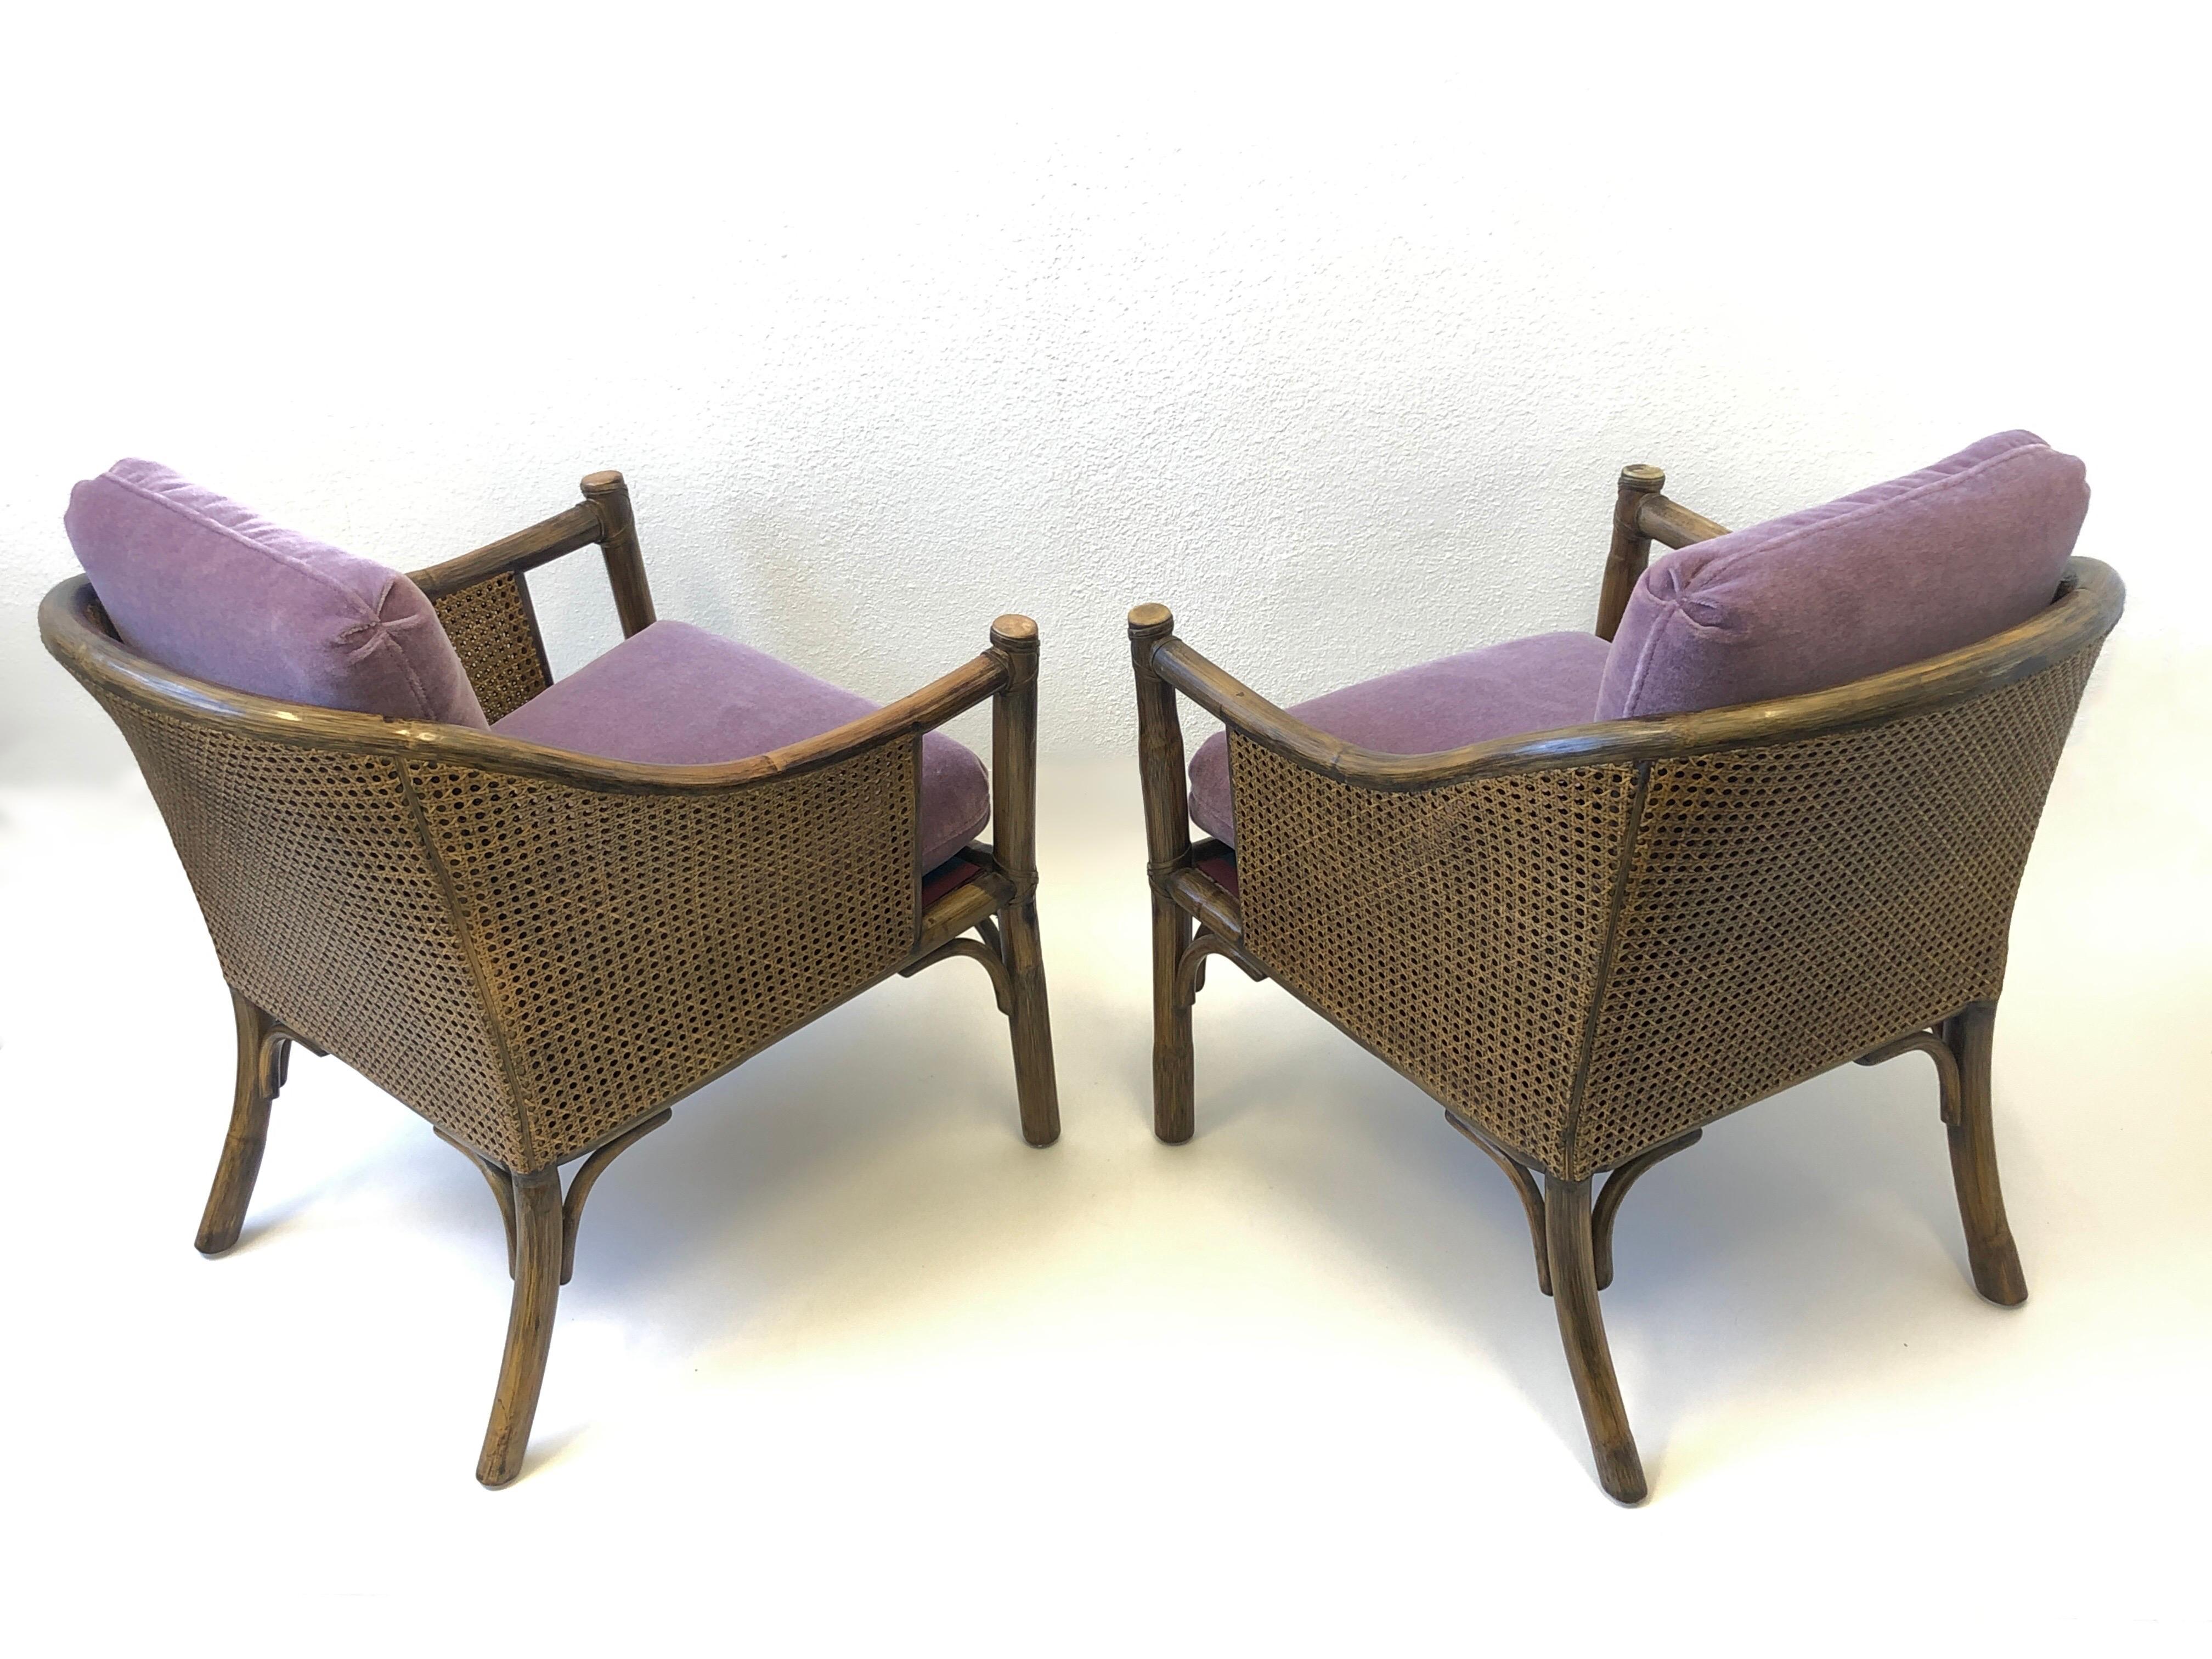 Hide Pair of Bamboo and Cane Lounge Chairs by McGuire